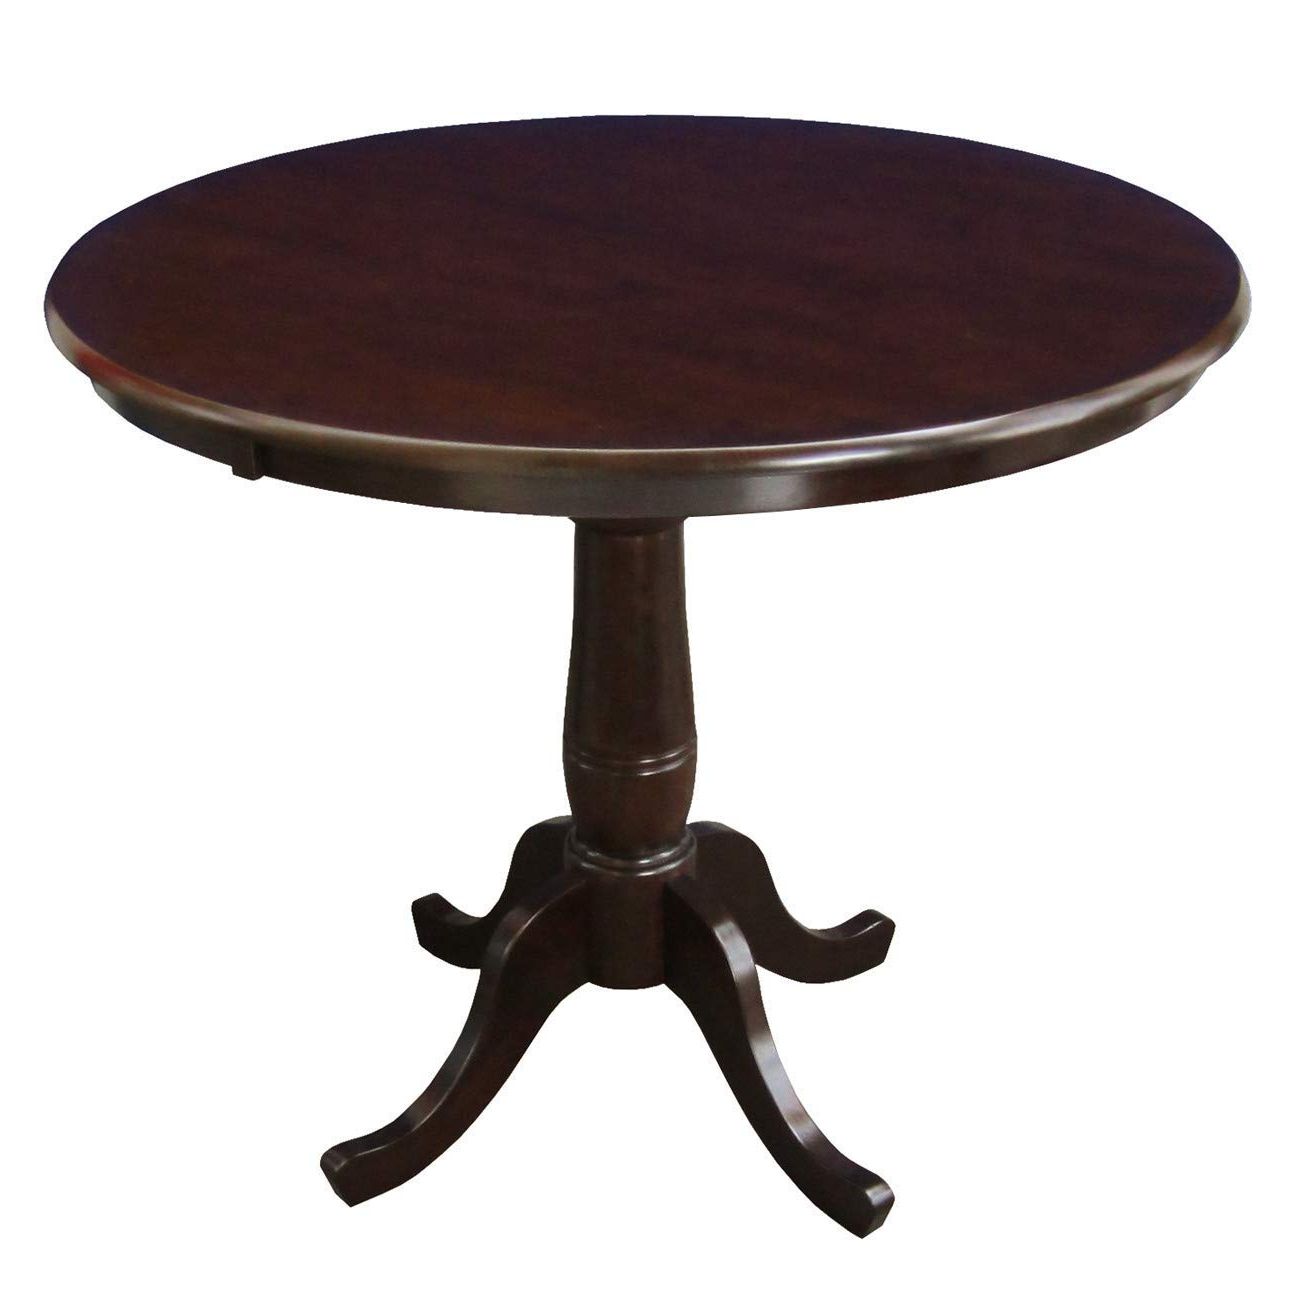 Trendy Transitional Antique Walnut Drop Leaf Casual Dining Tables In Cheap Wood Dining Table Round, Find Wood Dining Table Round (View 14 of 30)